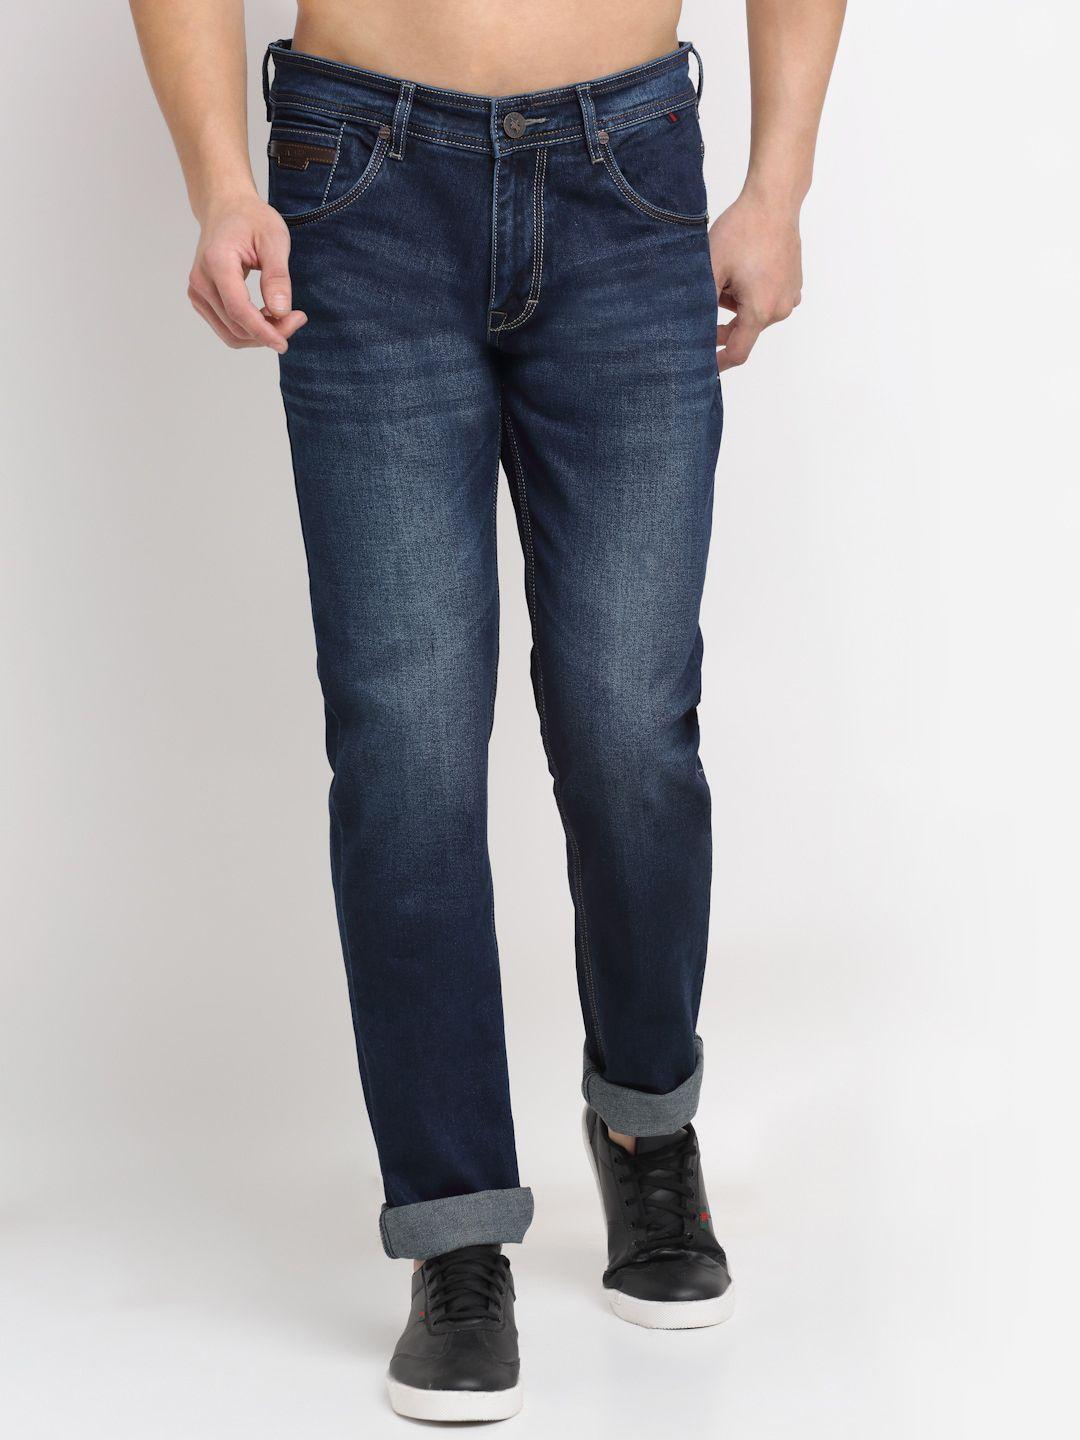 cantabil-men-cotton-heavy-fade-stretchable-jeans